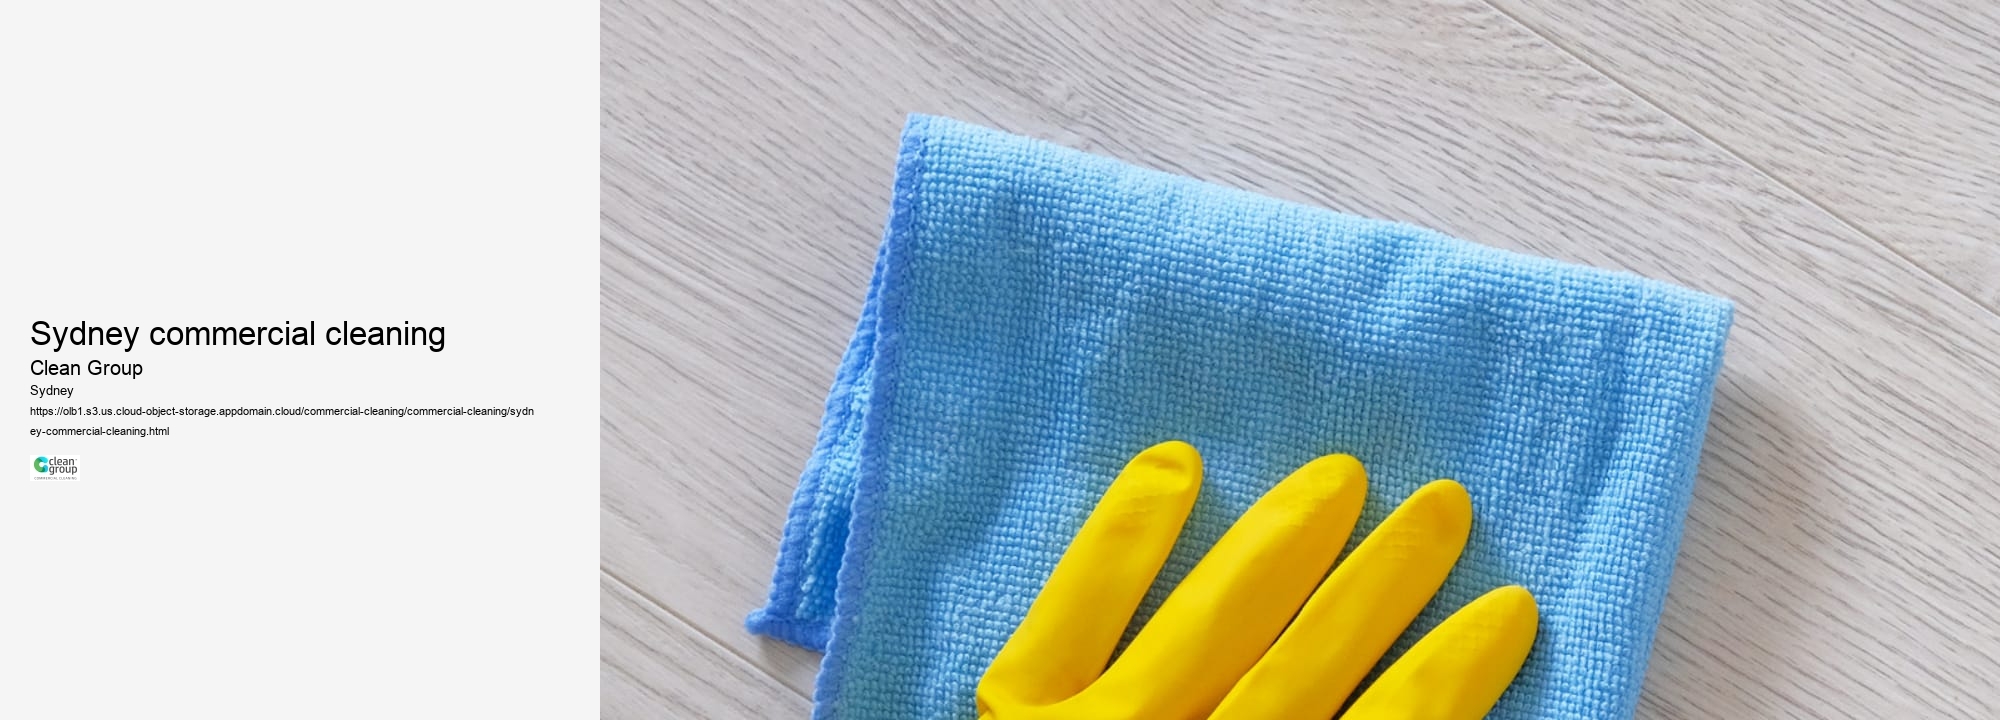 Sydney commercial cleaning